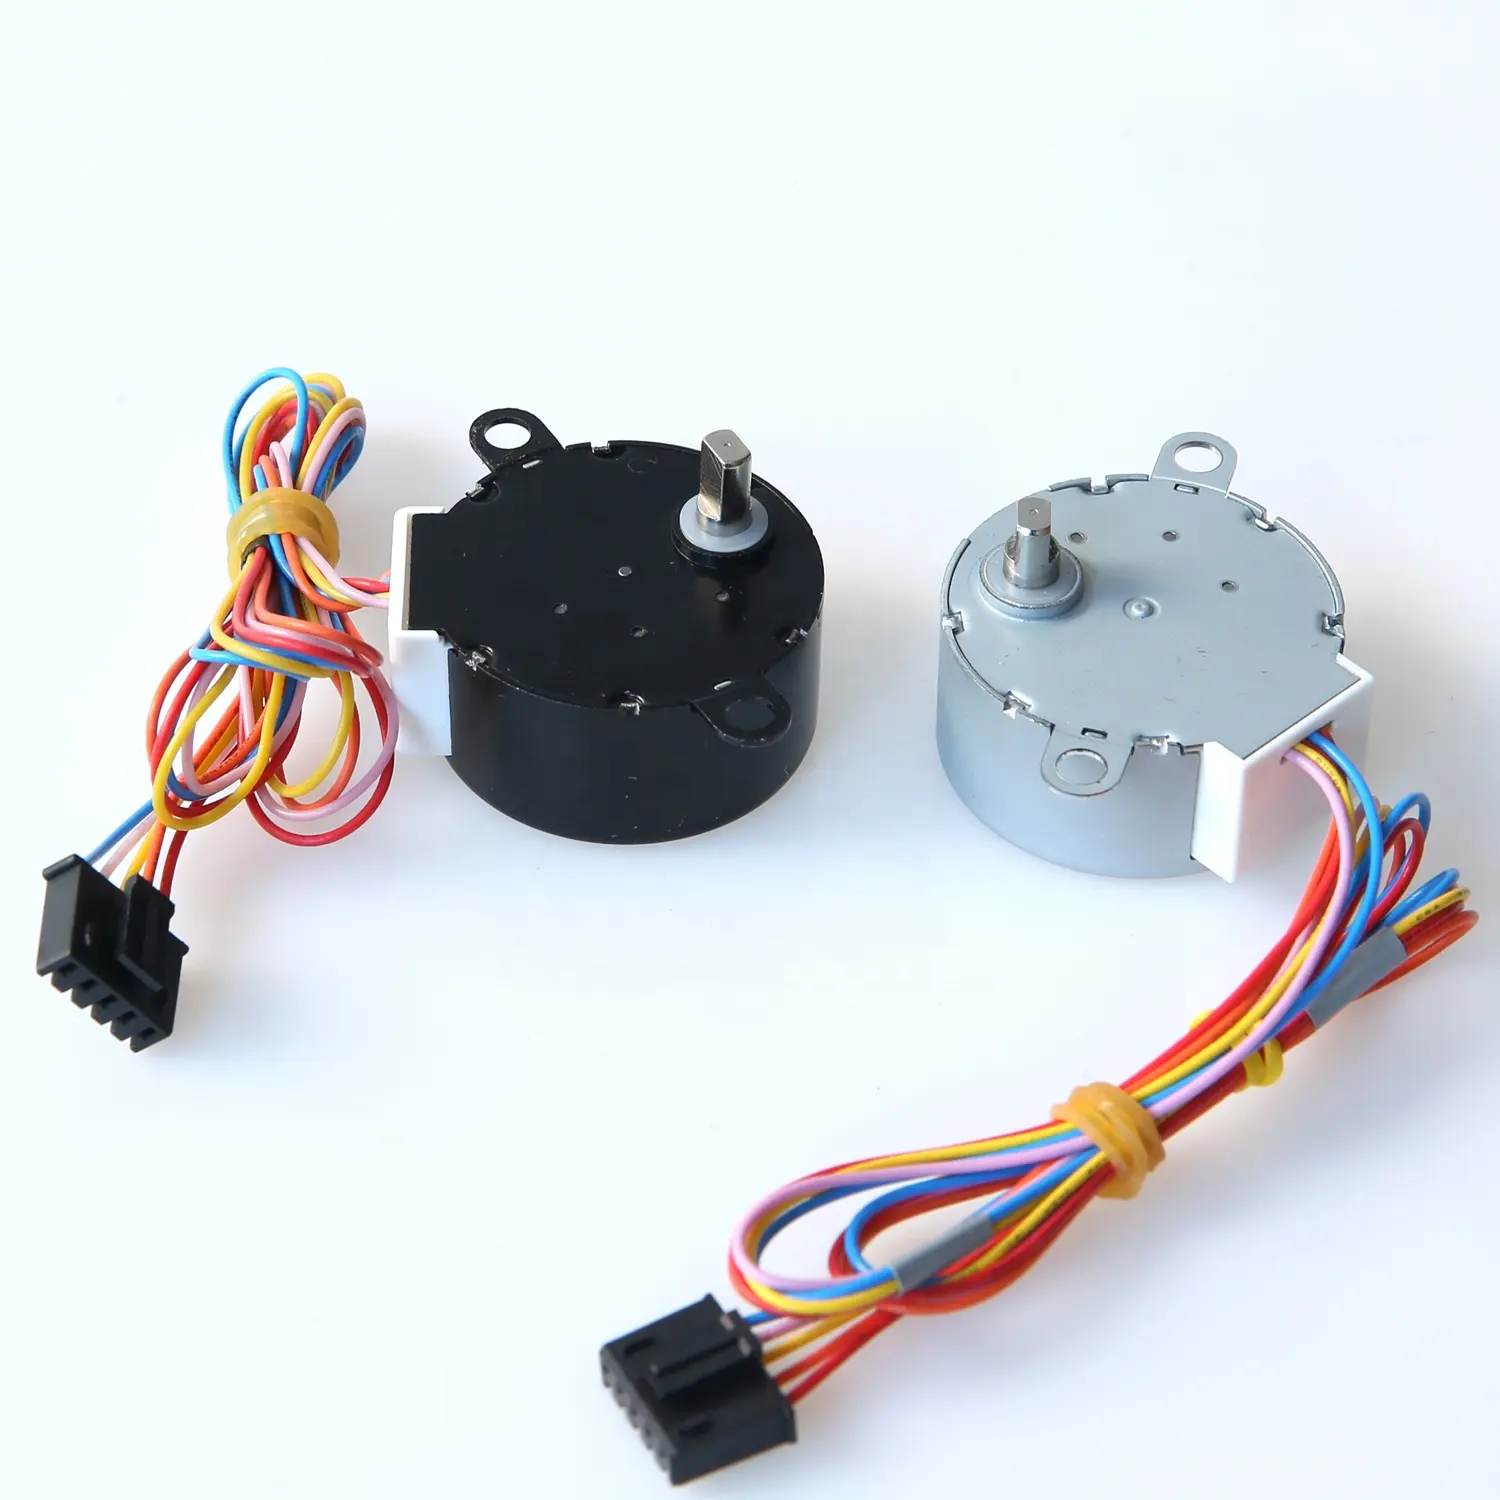 Brand new gear reducer stepper motor mount with high quality